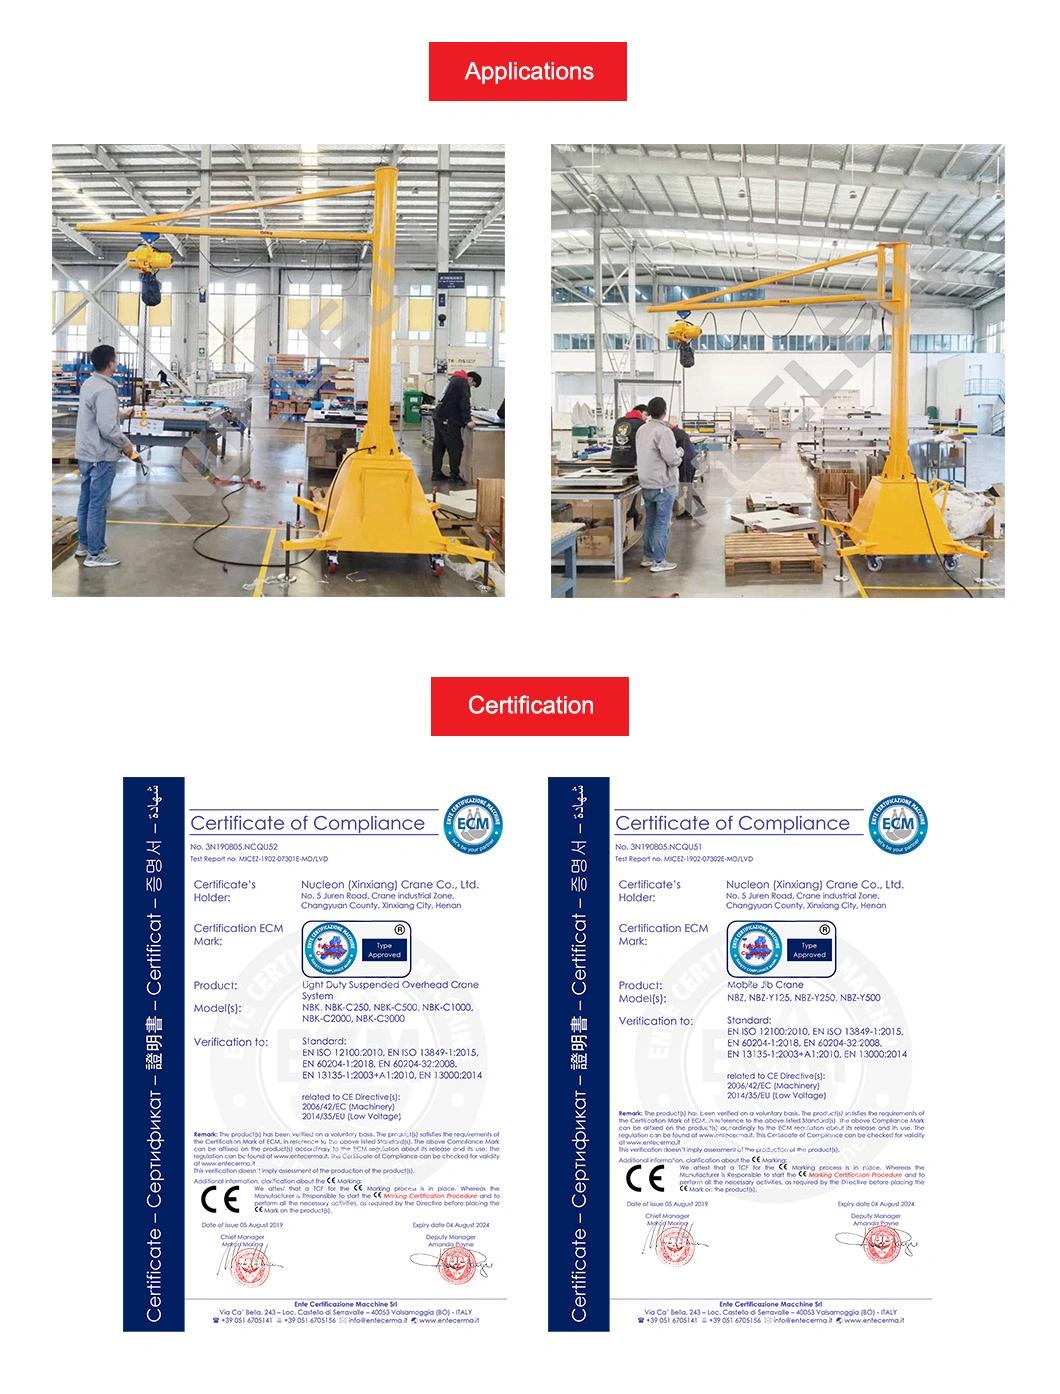 CE Certified 200kg Light Portable Mobile Jib Crane with Travelling Caster Wheels